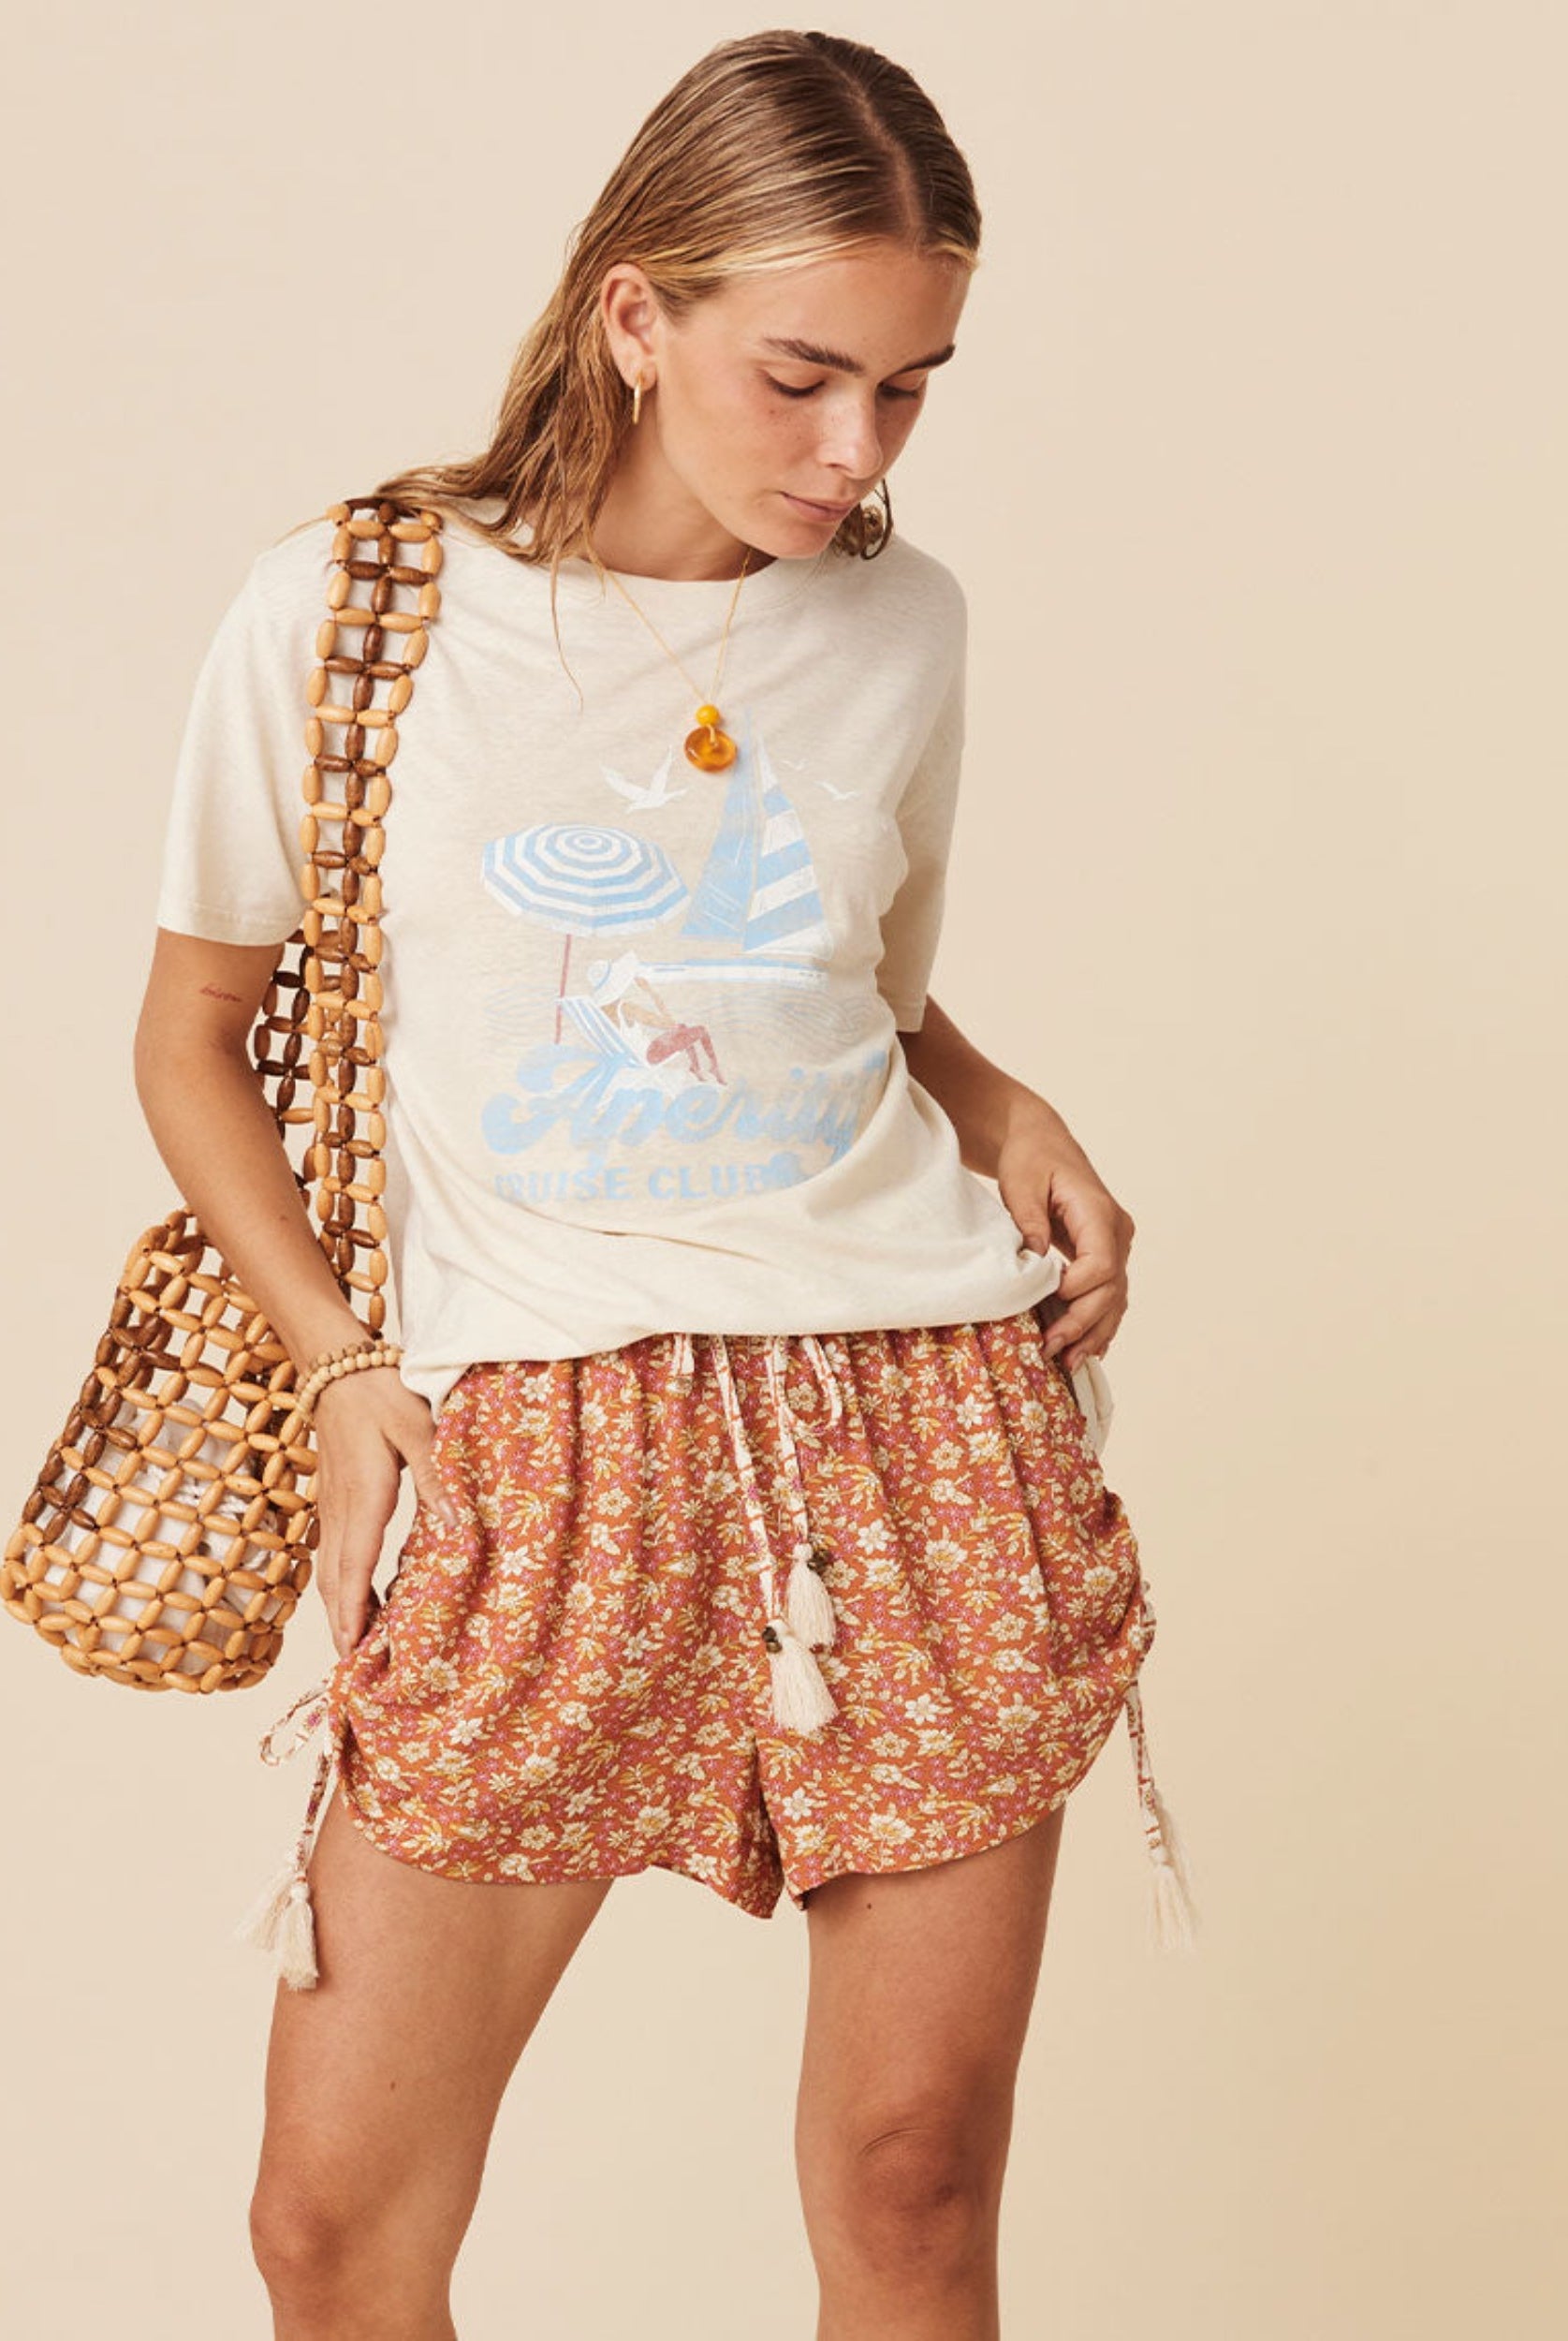 Cruise club motif tee in antique cream from Spell